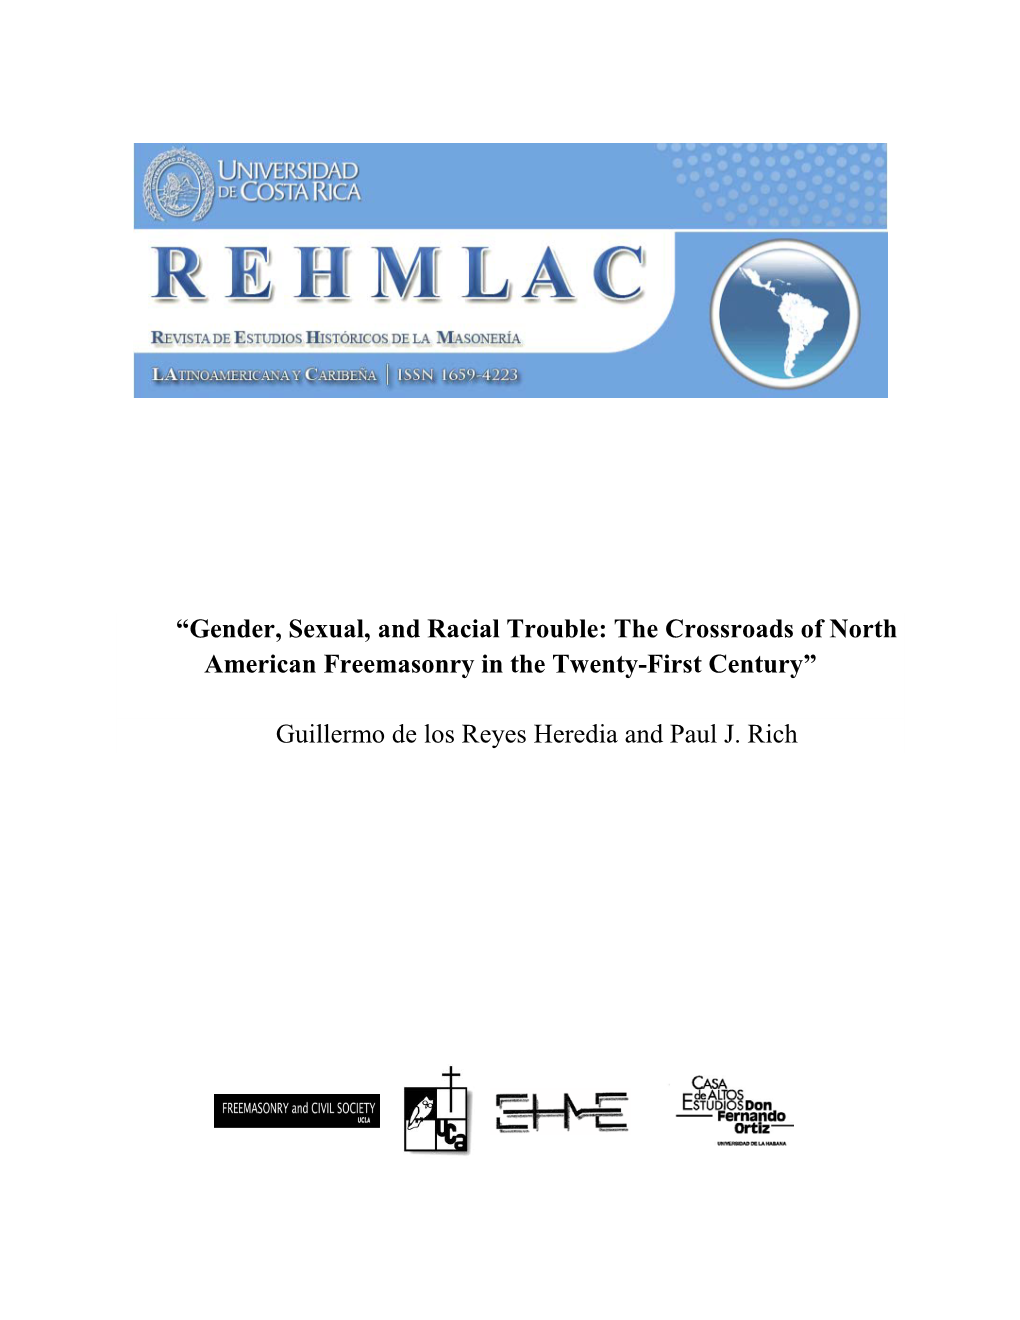 “Gender, Sexual, and Racial Trouble: the Crossroads of North American Freemasonry in the Twenty-First Century”